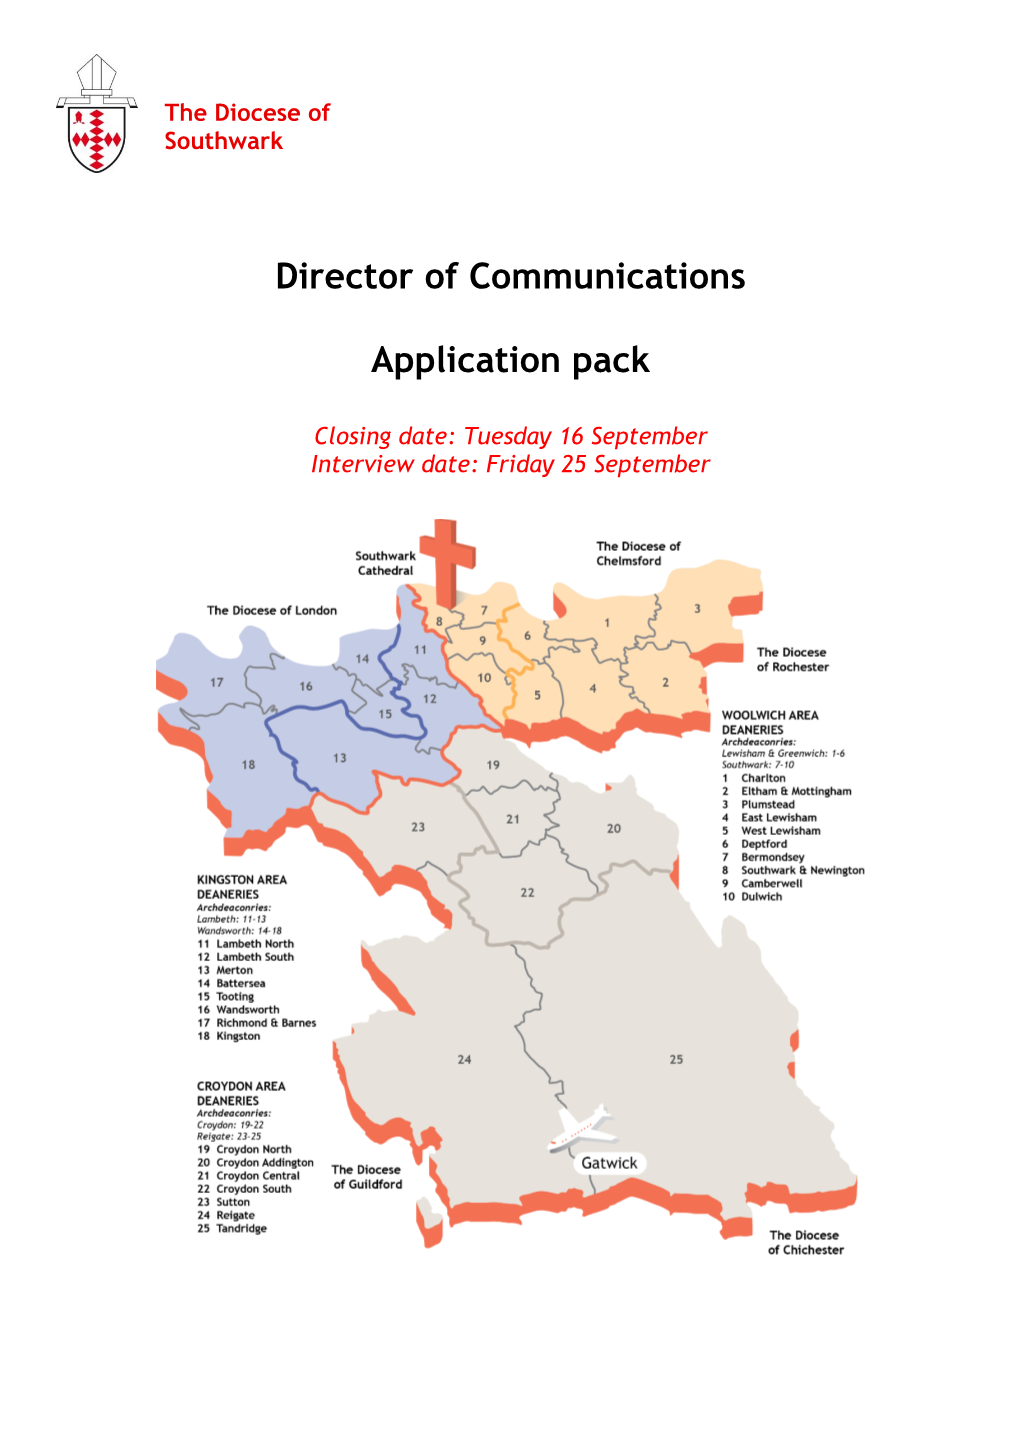 Director of Communications Application Pack